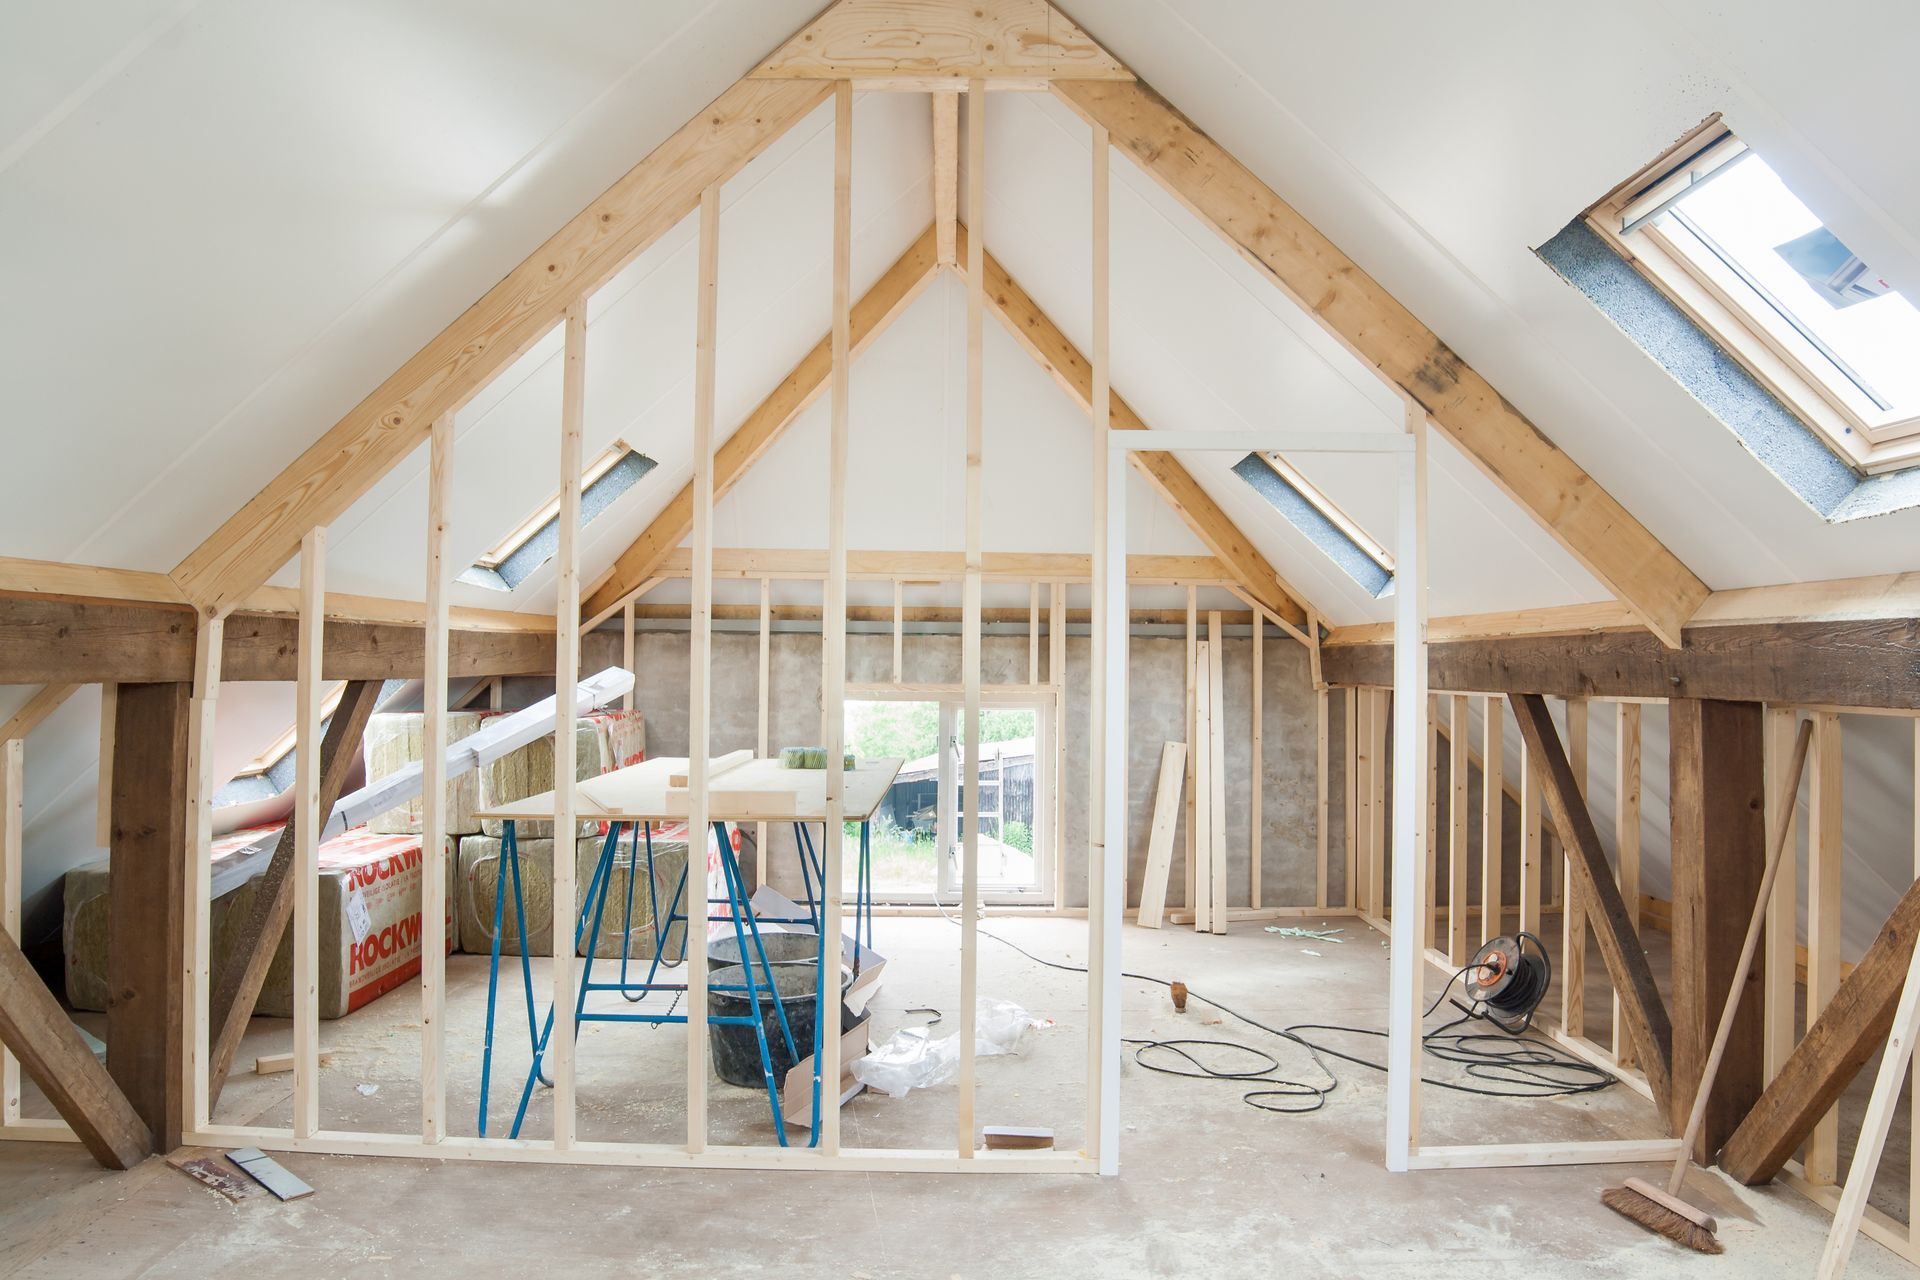 An image of a home renovation in progress, showcasing a newly renovated interior space.